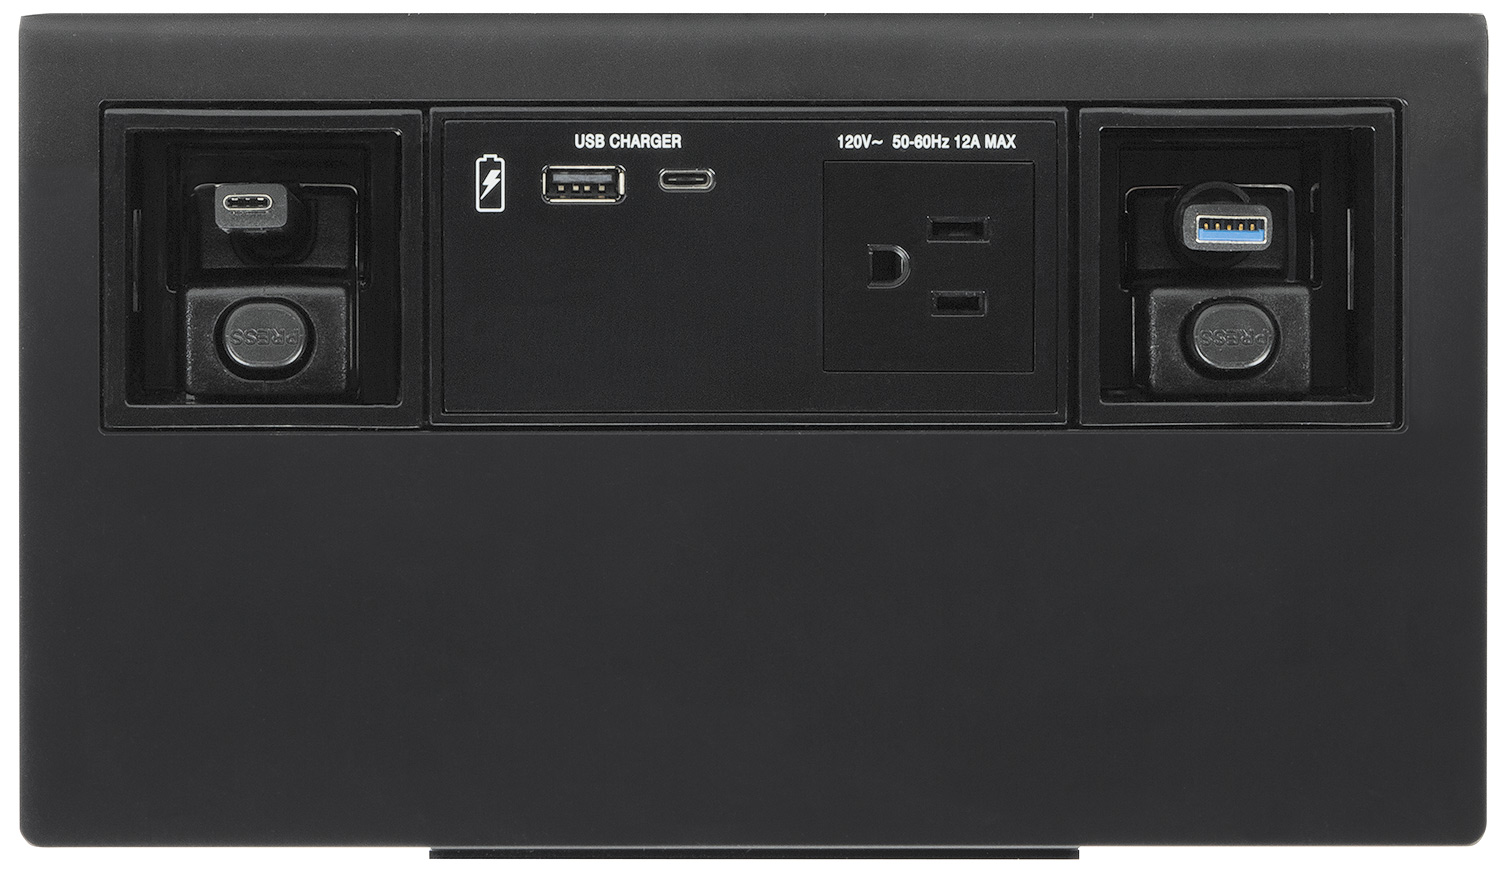 Cable Cubby F55 Edge is compatible with Retractor and Flex55 power modules available with USB-C and/or USB Type-A outlets and/or one unswitched AC power outlet for the US, Europe, and other major world markets; sold separately